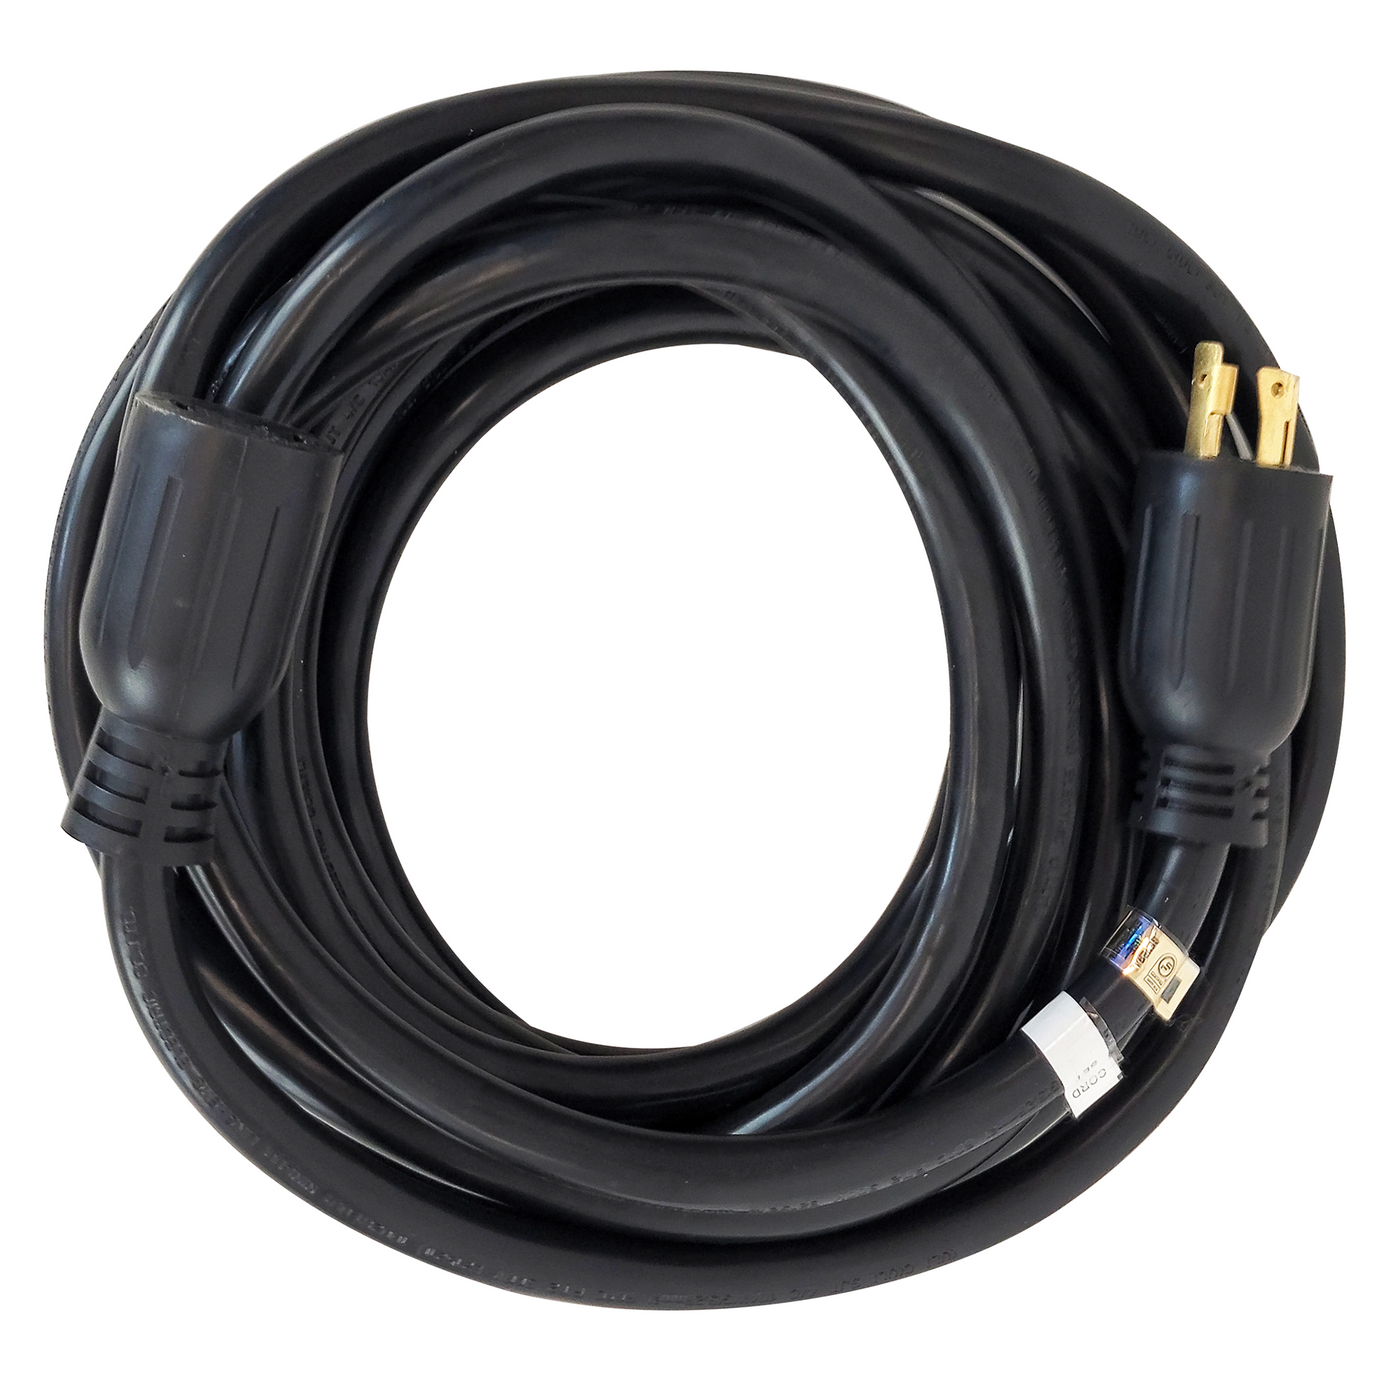 Ship-to-Shore Power Cord Cover 25ft Black 